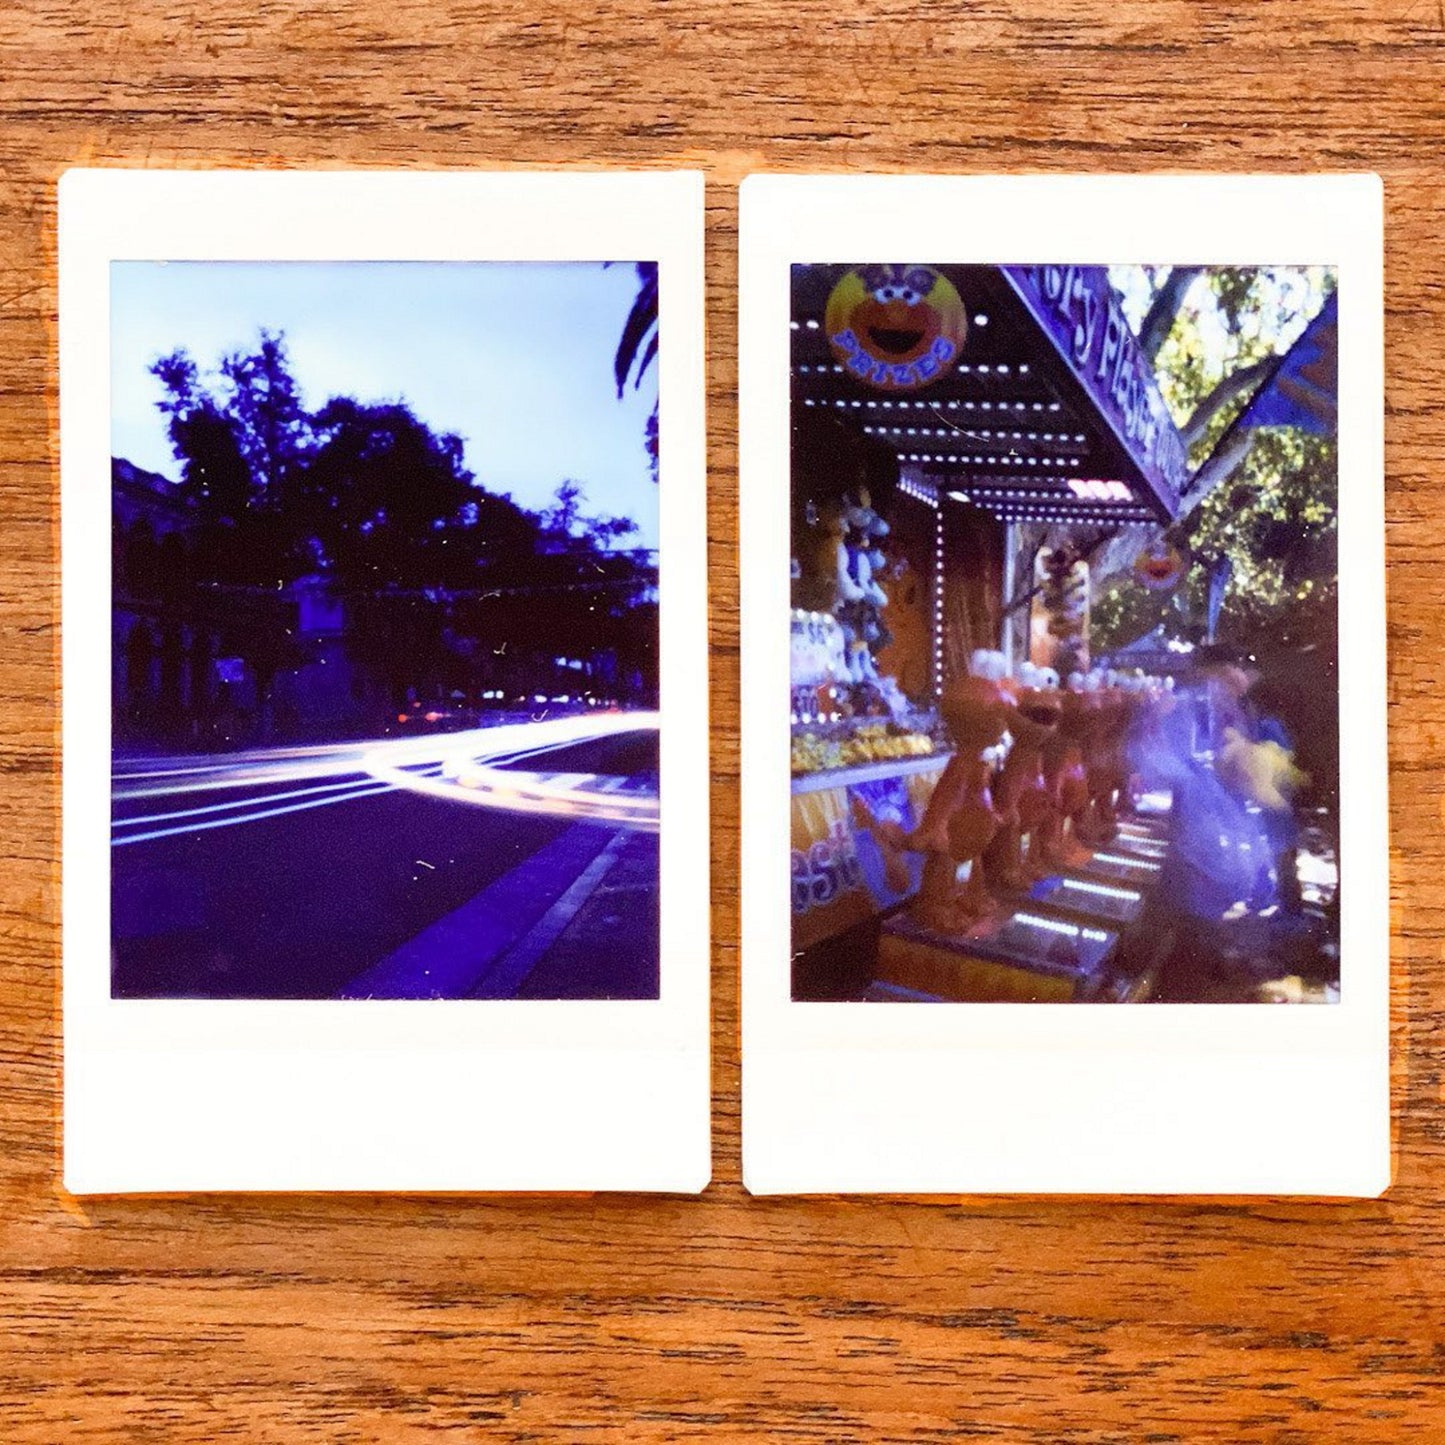 Two instant photos taken with a Jollylook Pinhole Mini camera, arranged on a table, capturing the excitement and variety of attractions at an amusement park